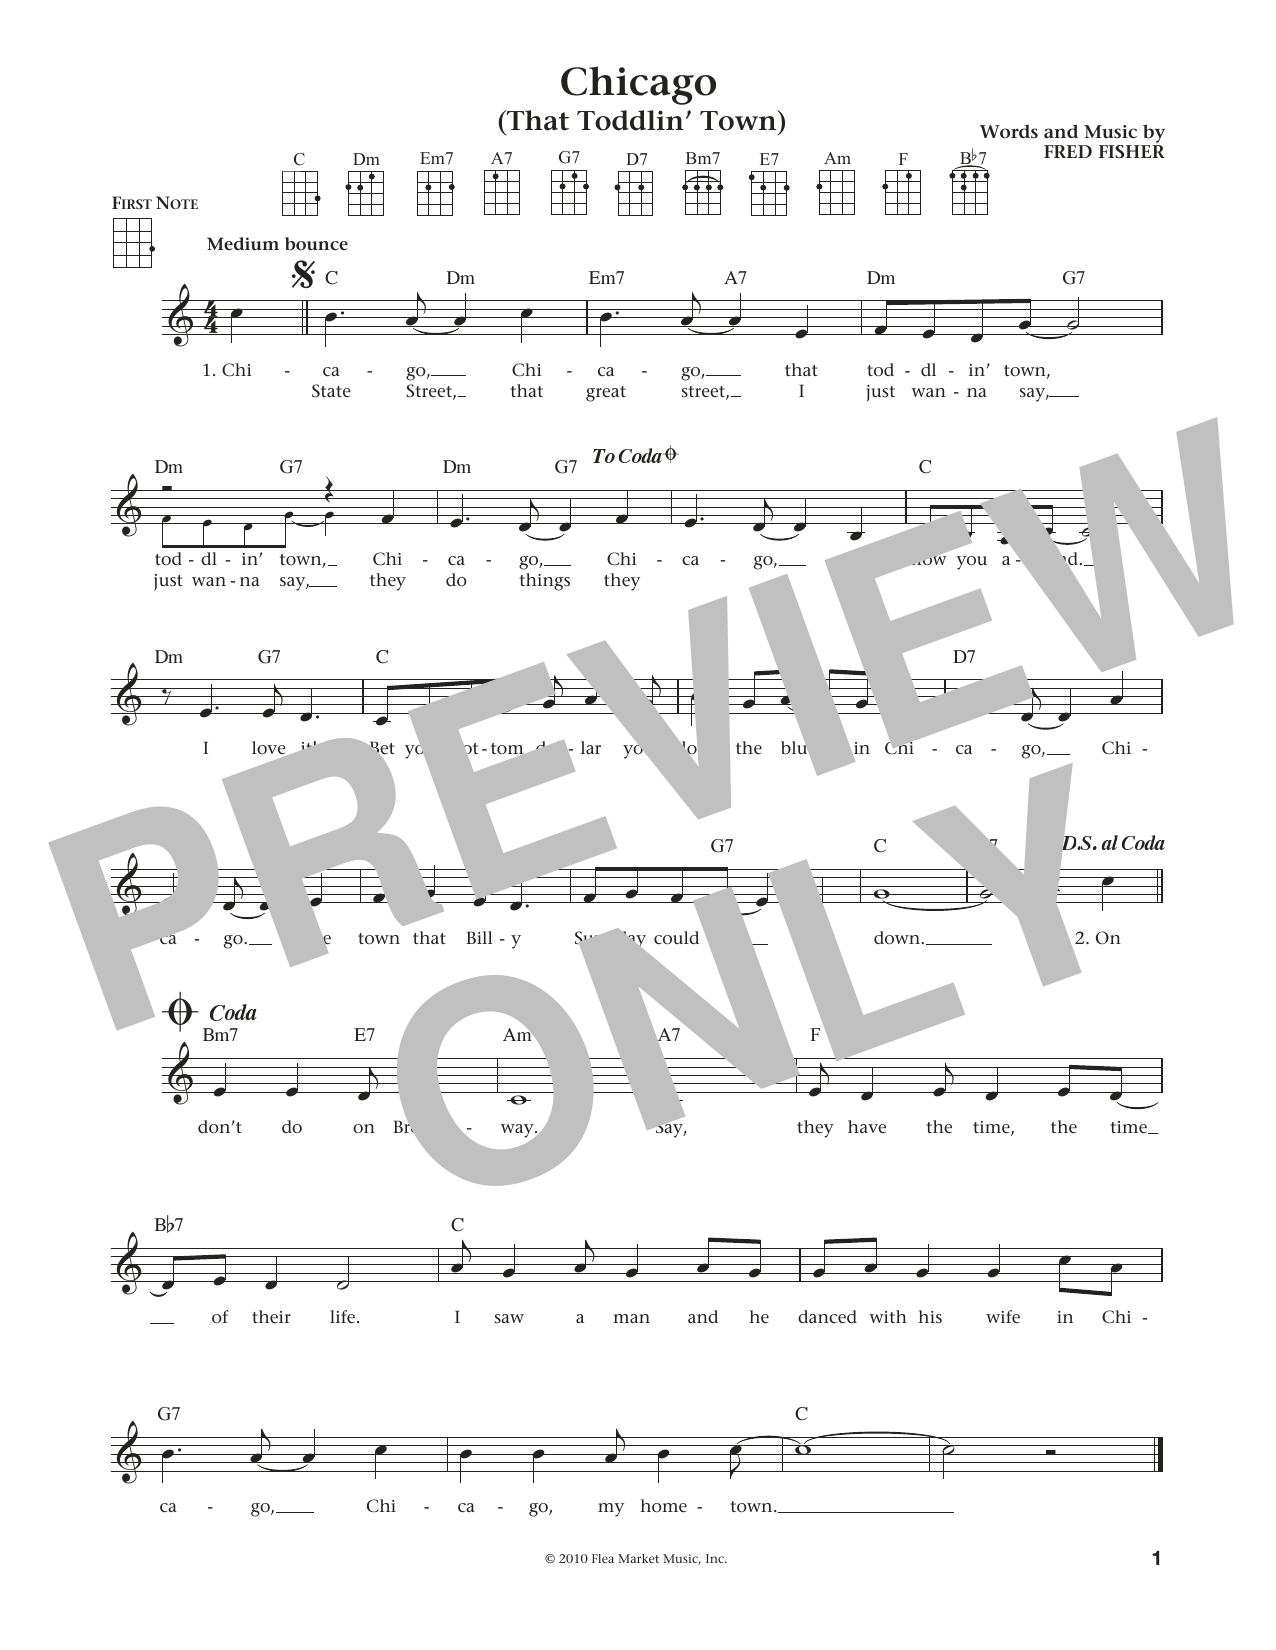 Download Frank Sinatra Chicago (That Toddlin' Town) (from The Sheet Music